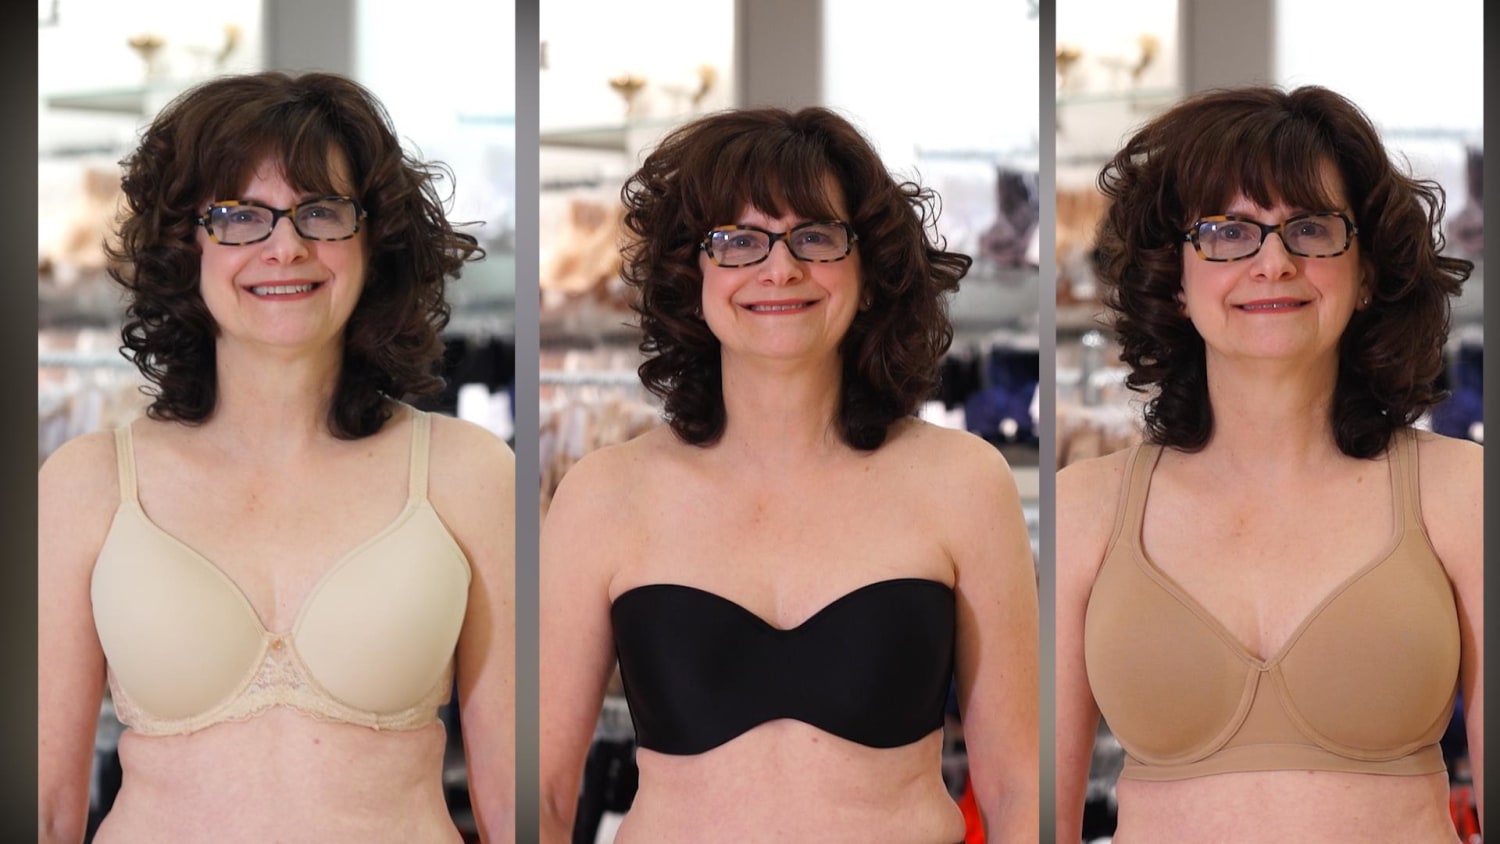 Girls can improve breast shape by not wearing bra, reveals study